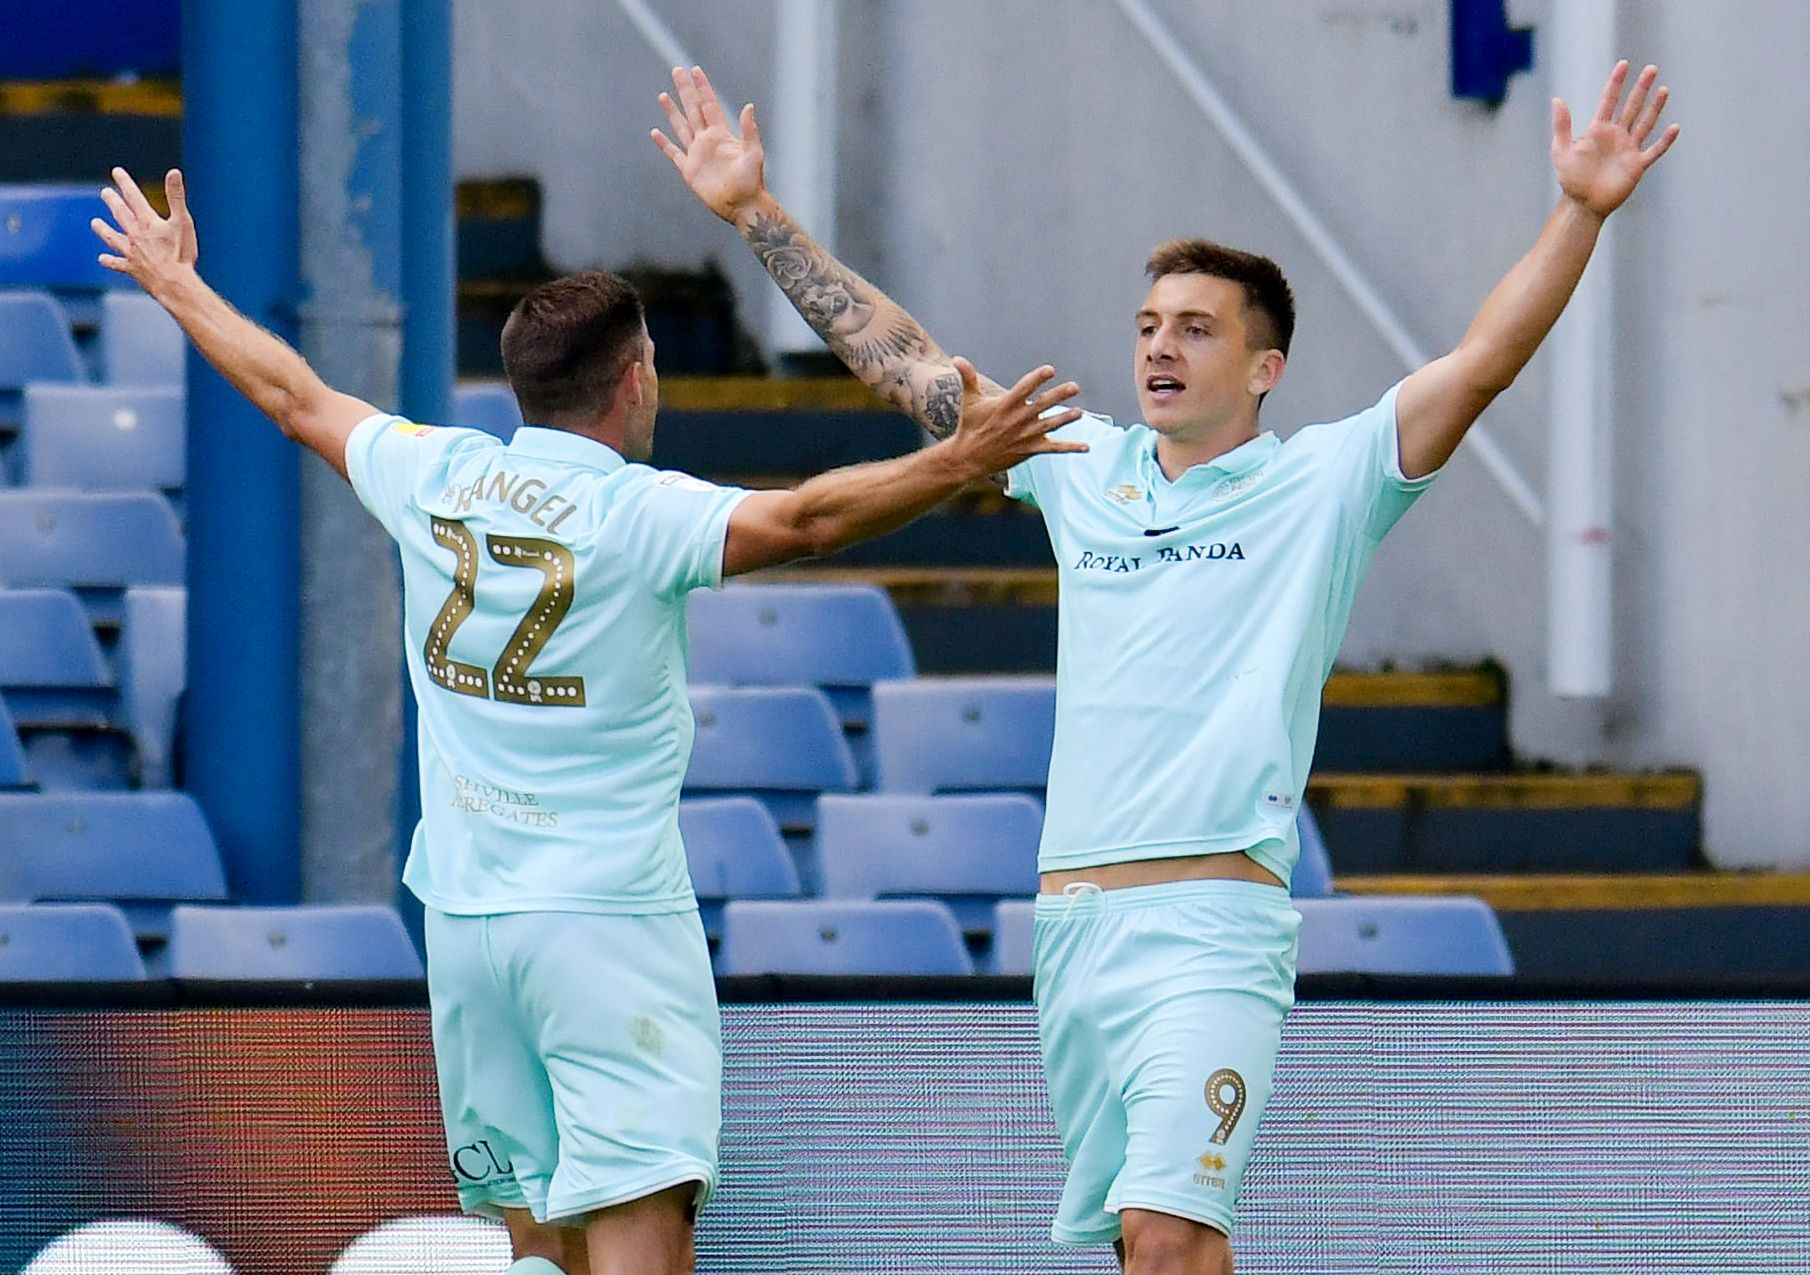 Soccer Football - Championship - Sheffield Wednesday v Queens Park Rangers - Hillsborough, Sheffield, Britain - August 31, 2019   Queens Park Rangers' Jordan Hugill celebrates scoring their first goal with Angel Rangel   Action Images/Paul Burrows    EDITORIAL USE ONLY. No use with unauthorized audio, video, data, fixture lists, club/league logos or 